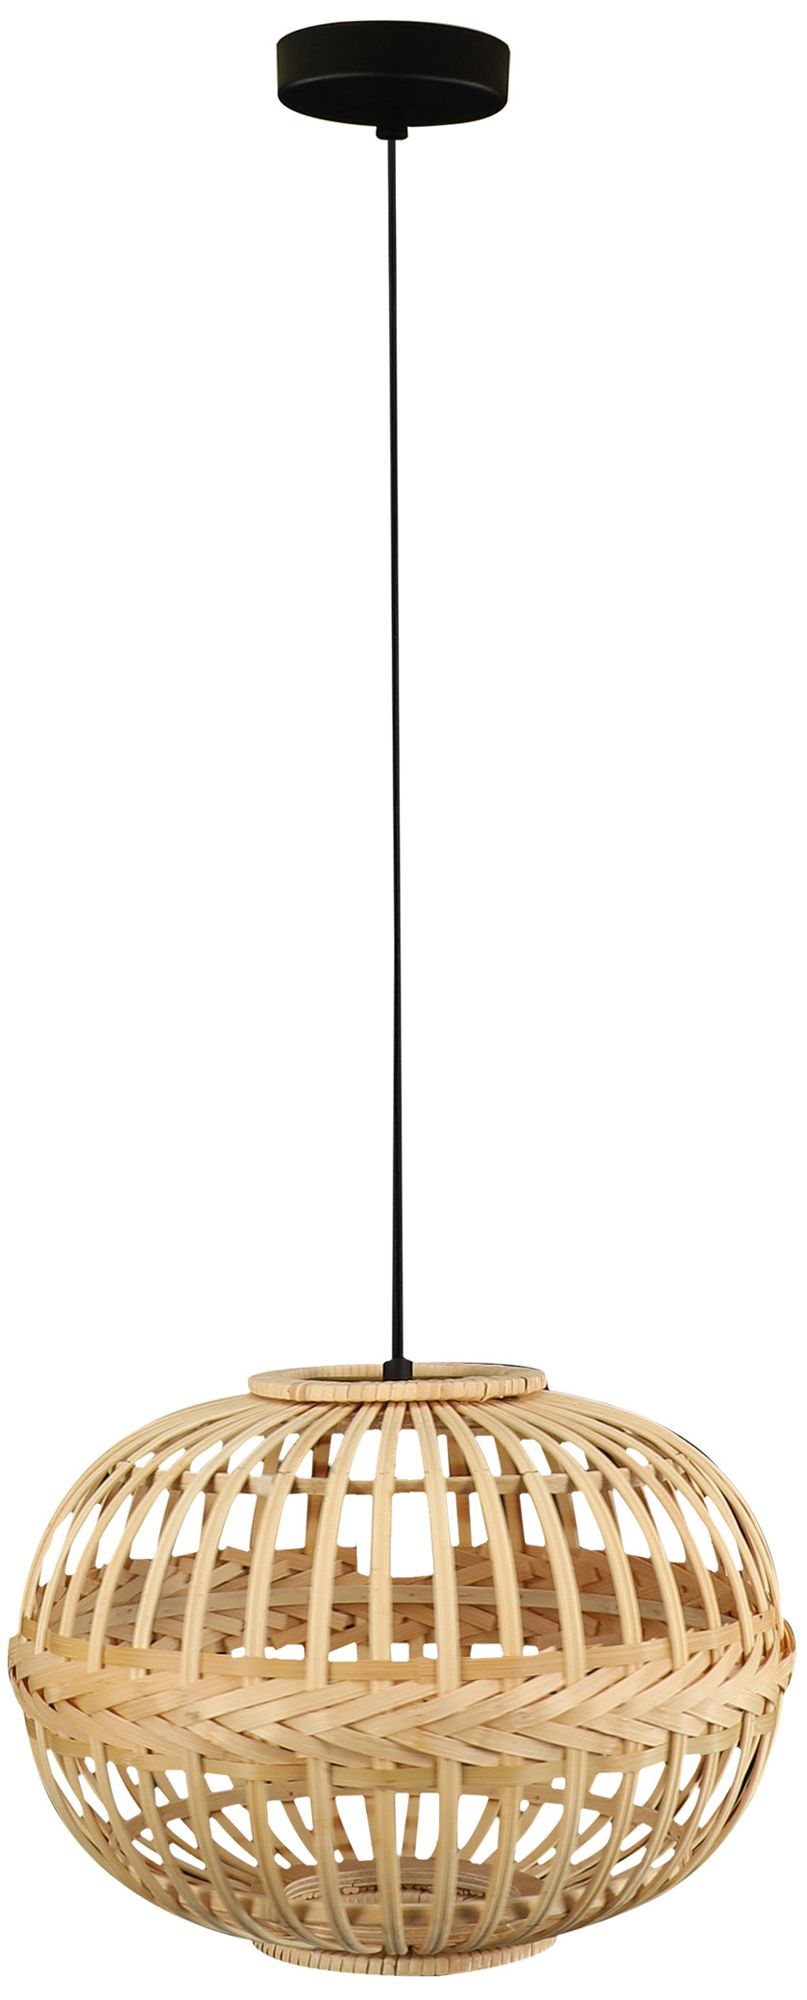 Armsfield - 1-Light Oval Pendant - Brown Finish - Brown Wood Shade